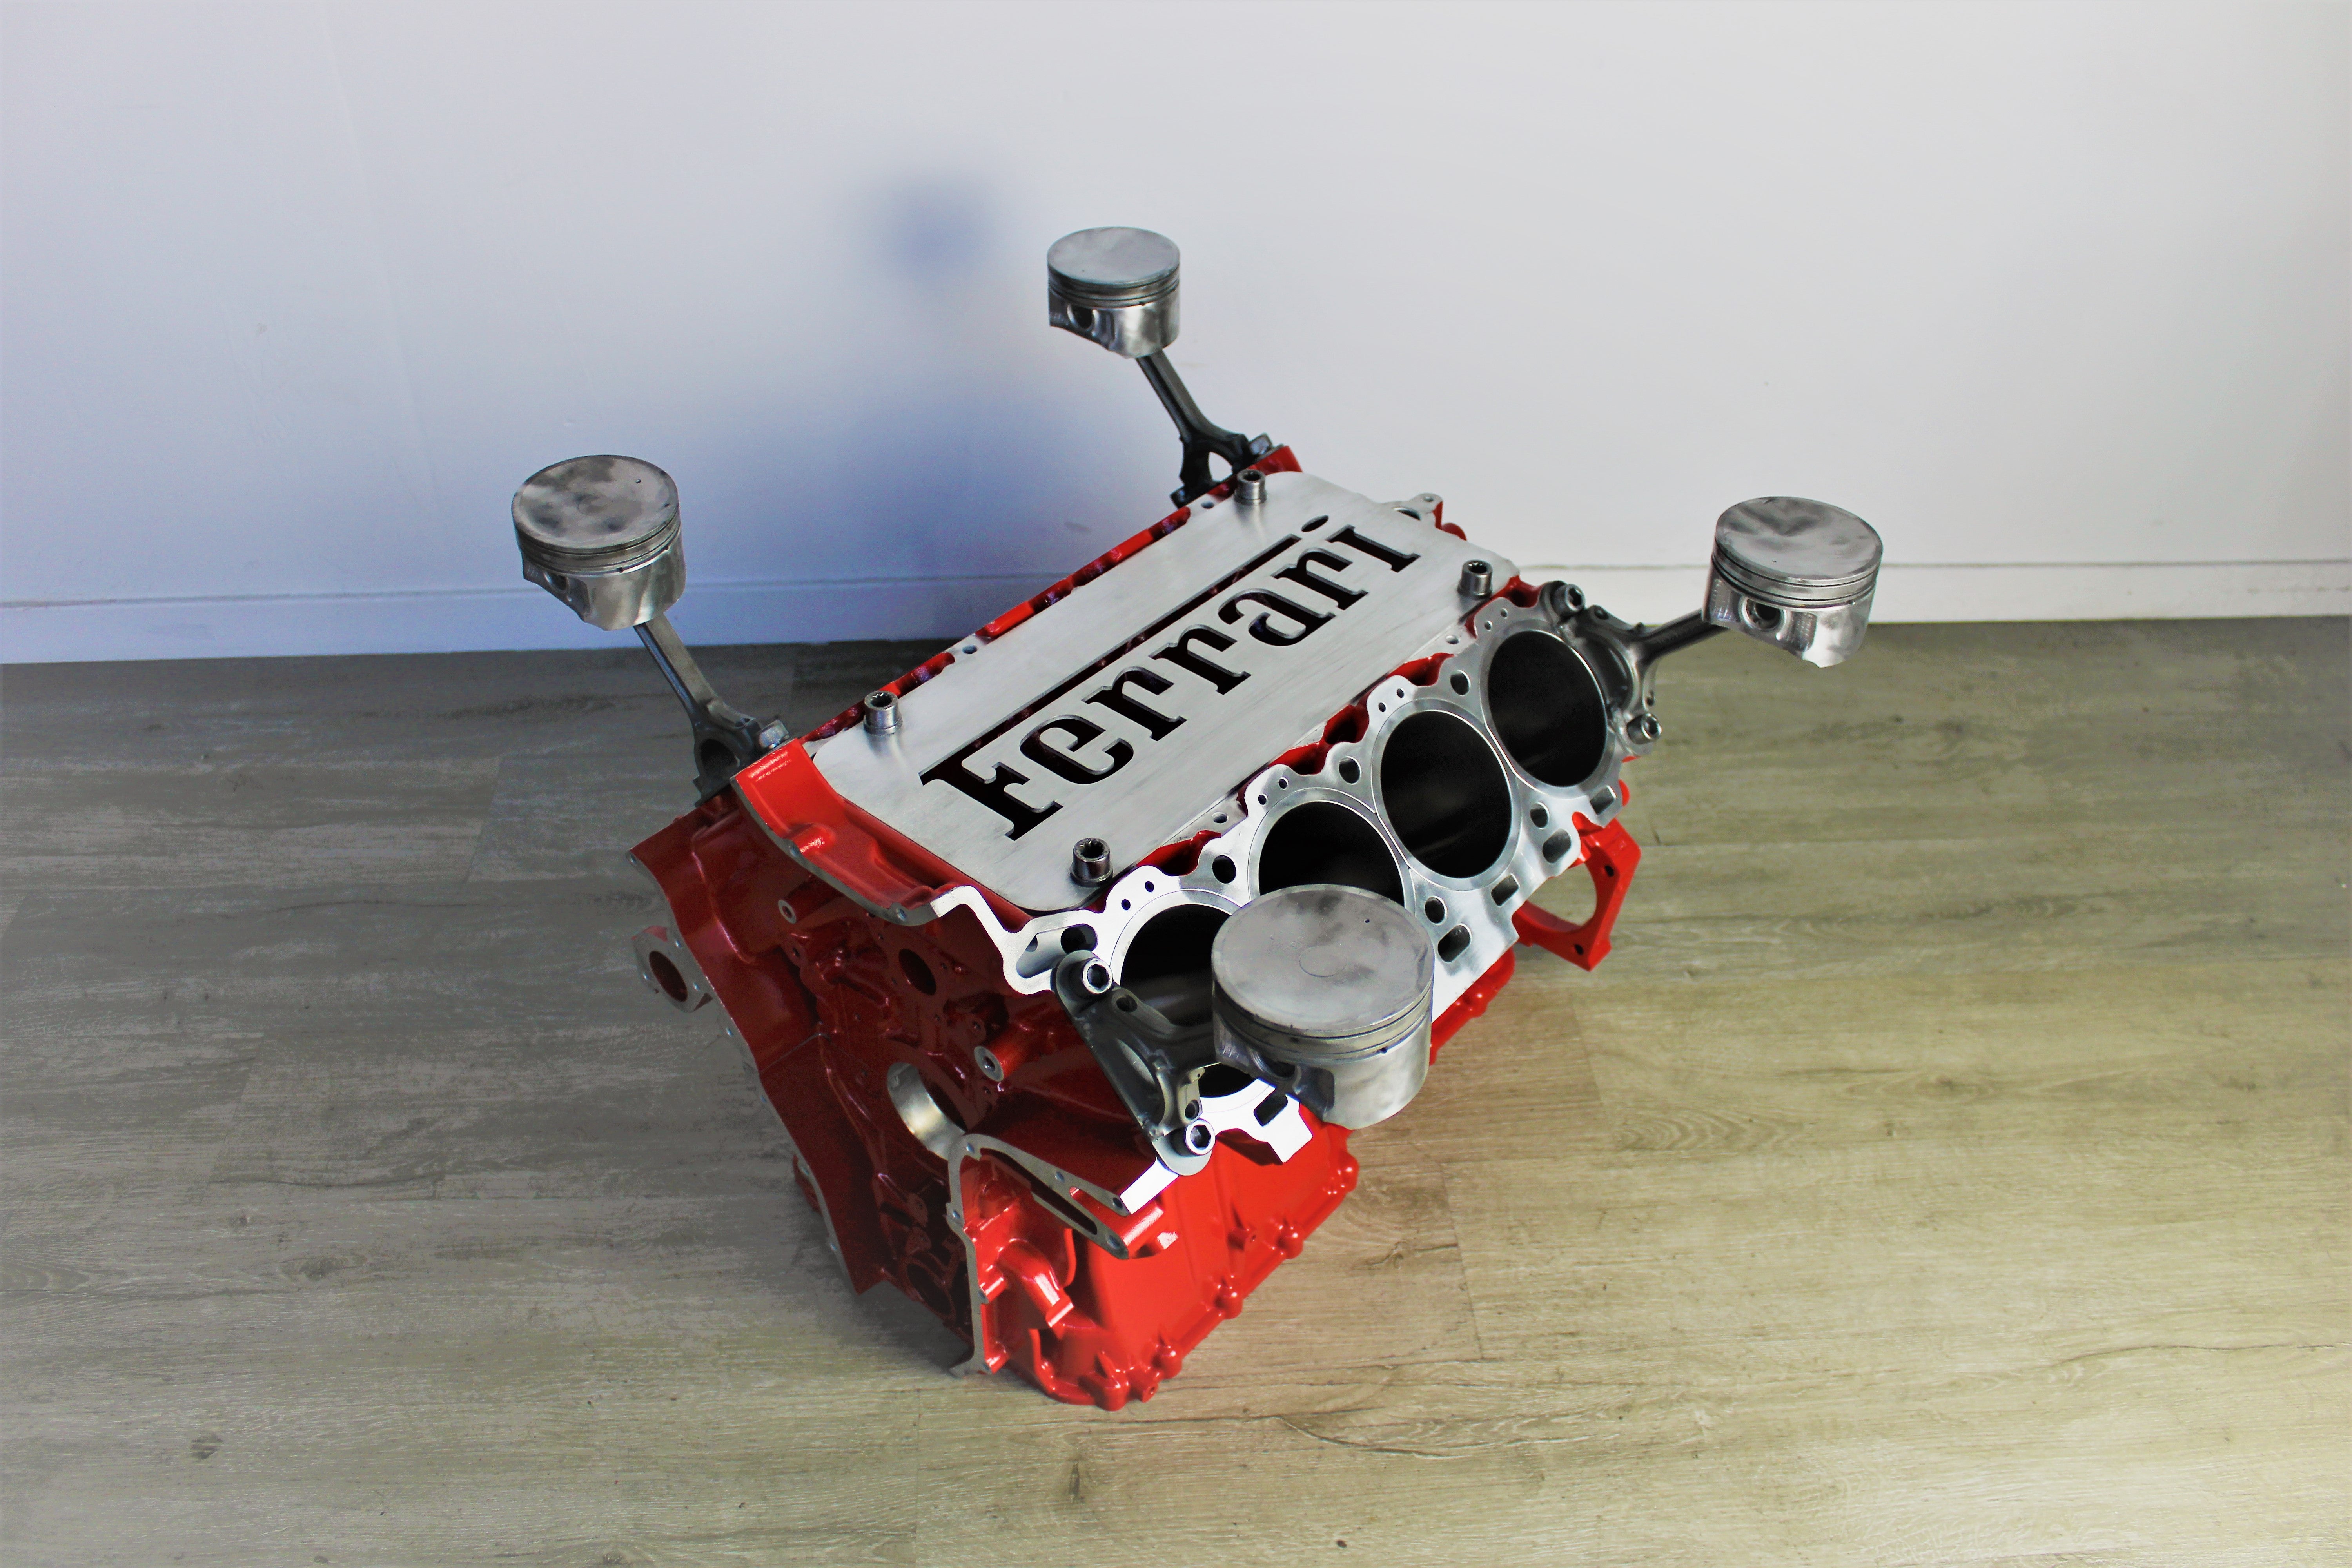 Ferrari engine block coffee table finished in red without its glass top and the Ferrari logo displayed in the center.